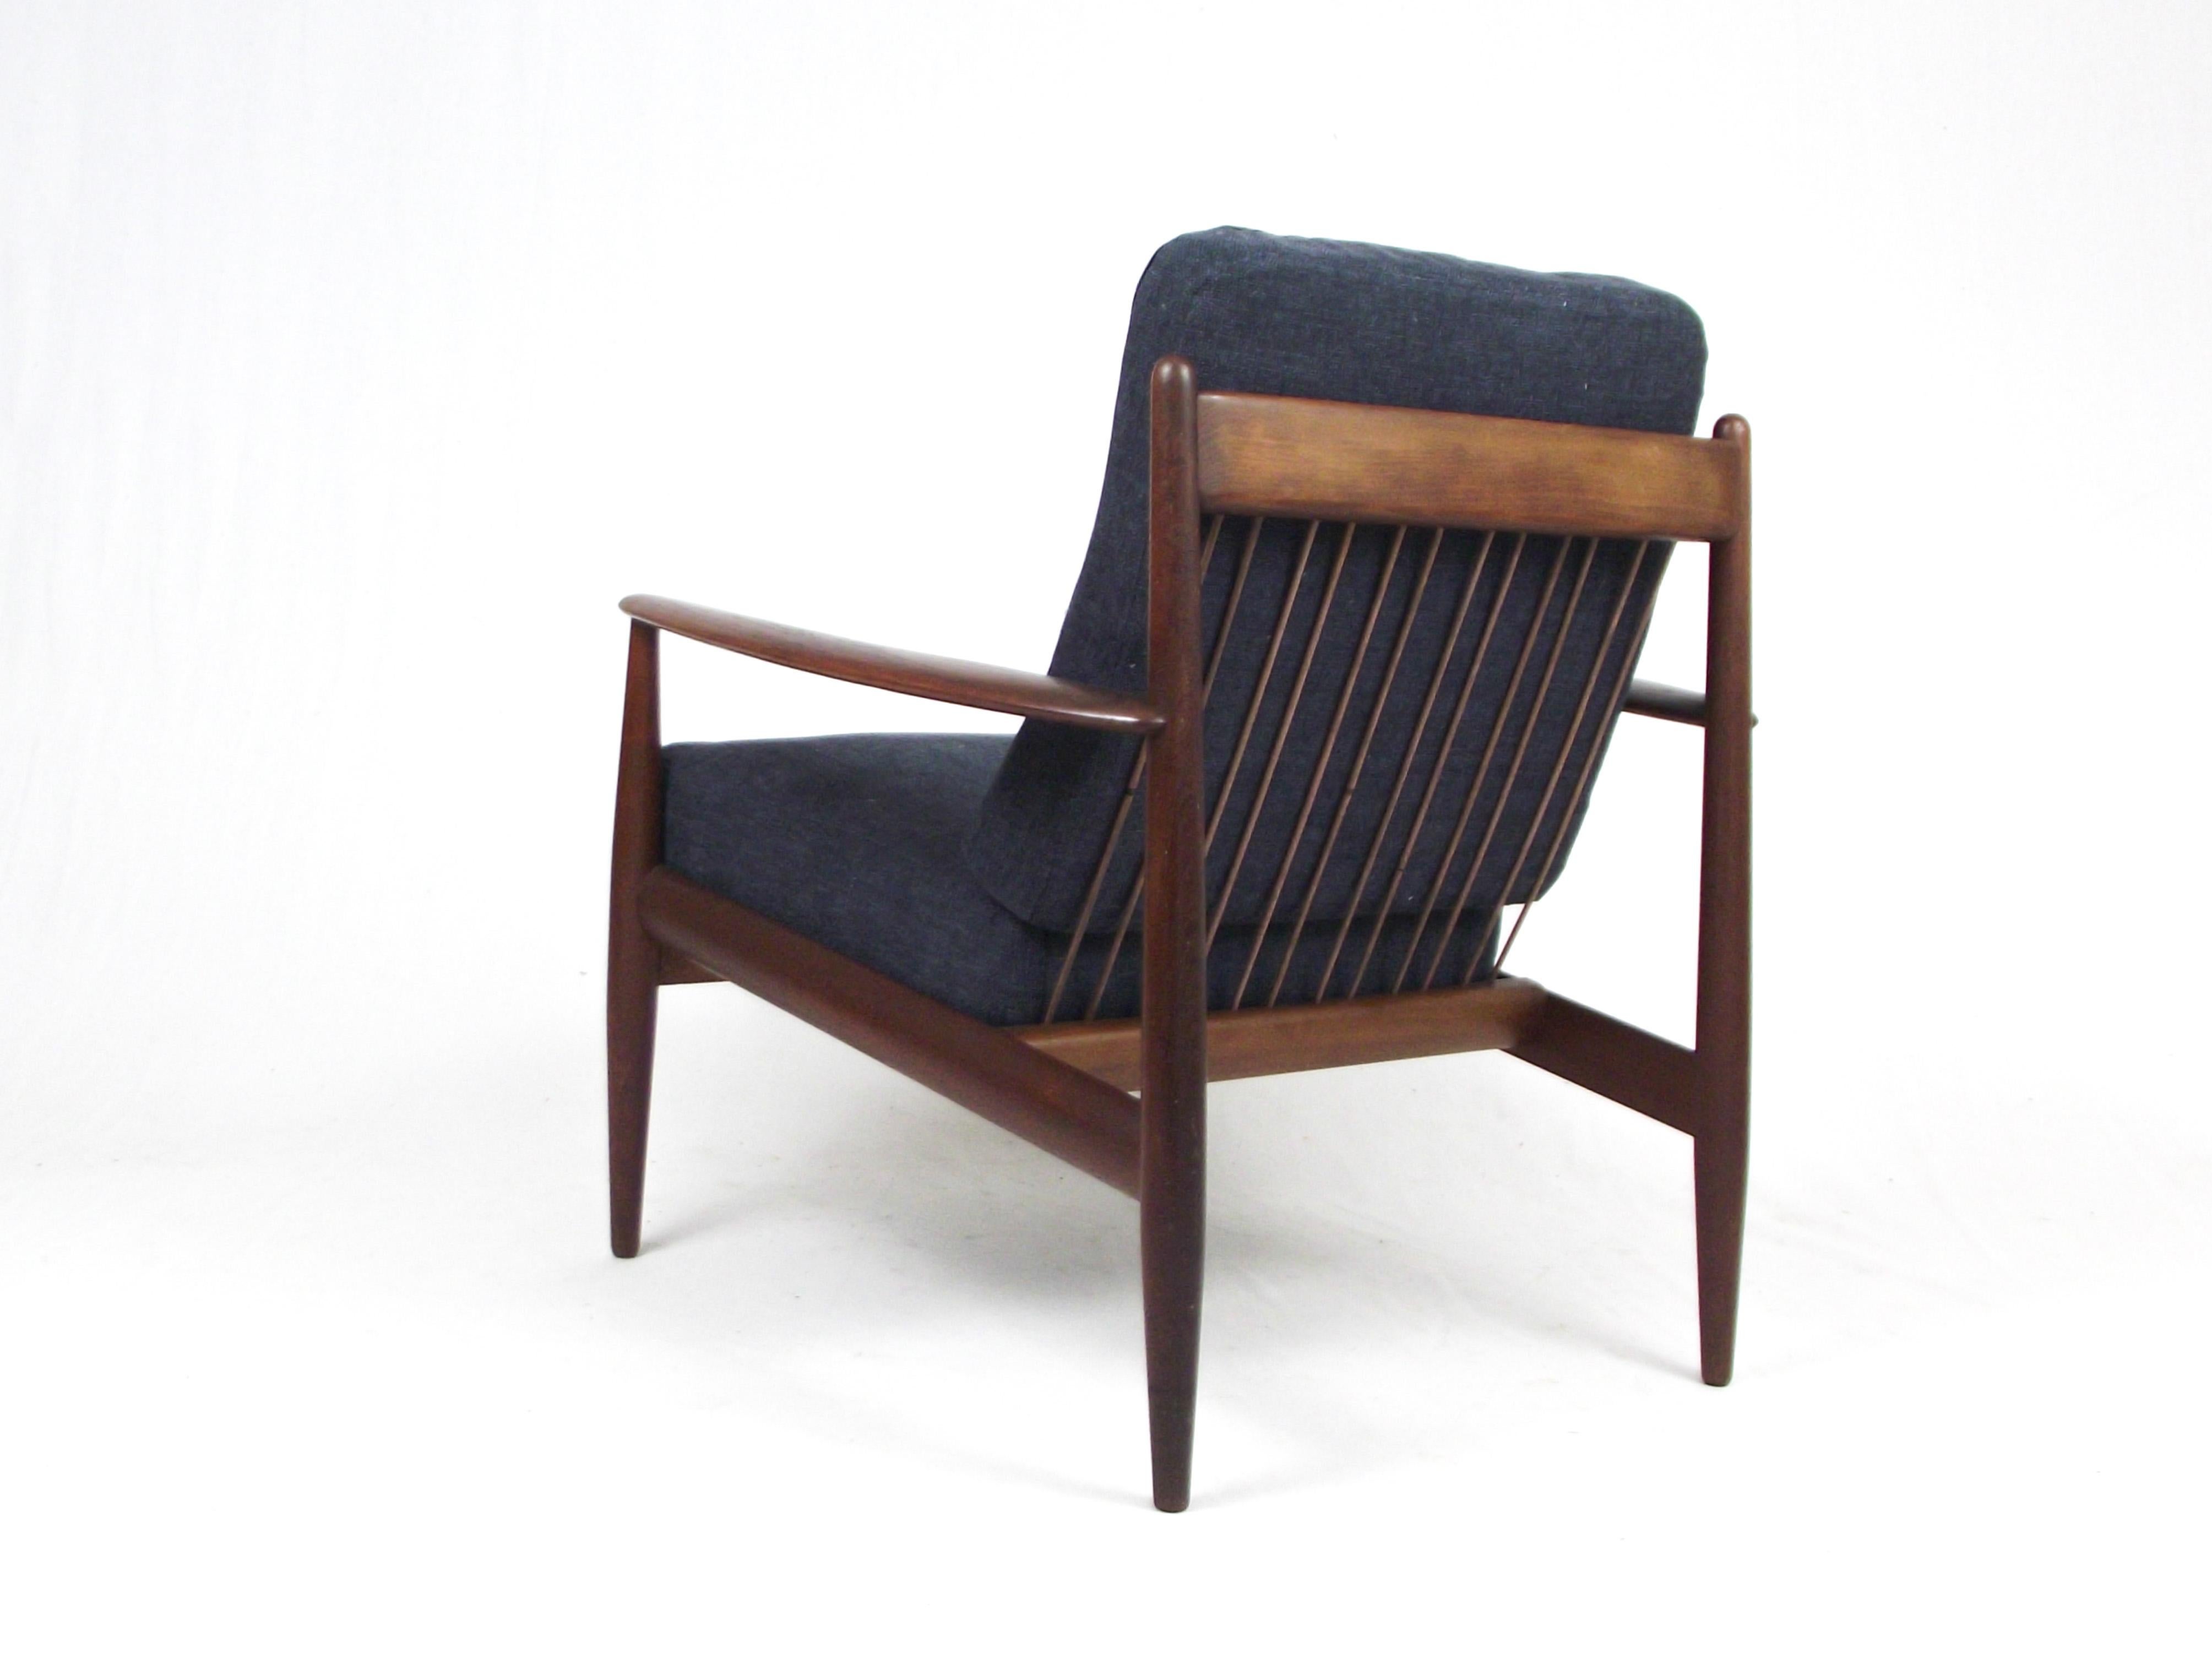 Armchair  danish 1950s designed by Grete Jalk and produced in the early 1950s by France & Daverkosen (known from the early 1960s as France & Son )

Solid teak wood frame , vinyl-covered springs, reupholstered. 

The chair features the manufacturer's